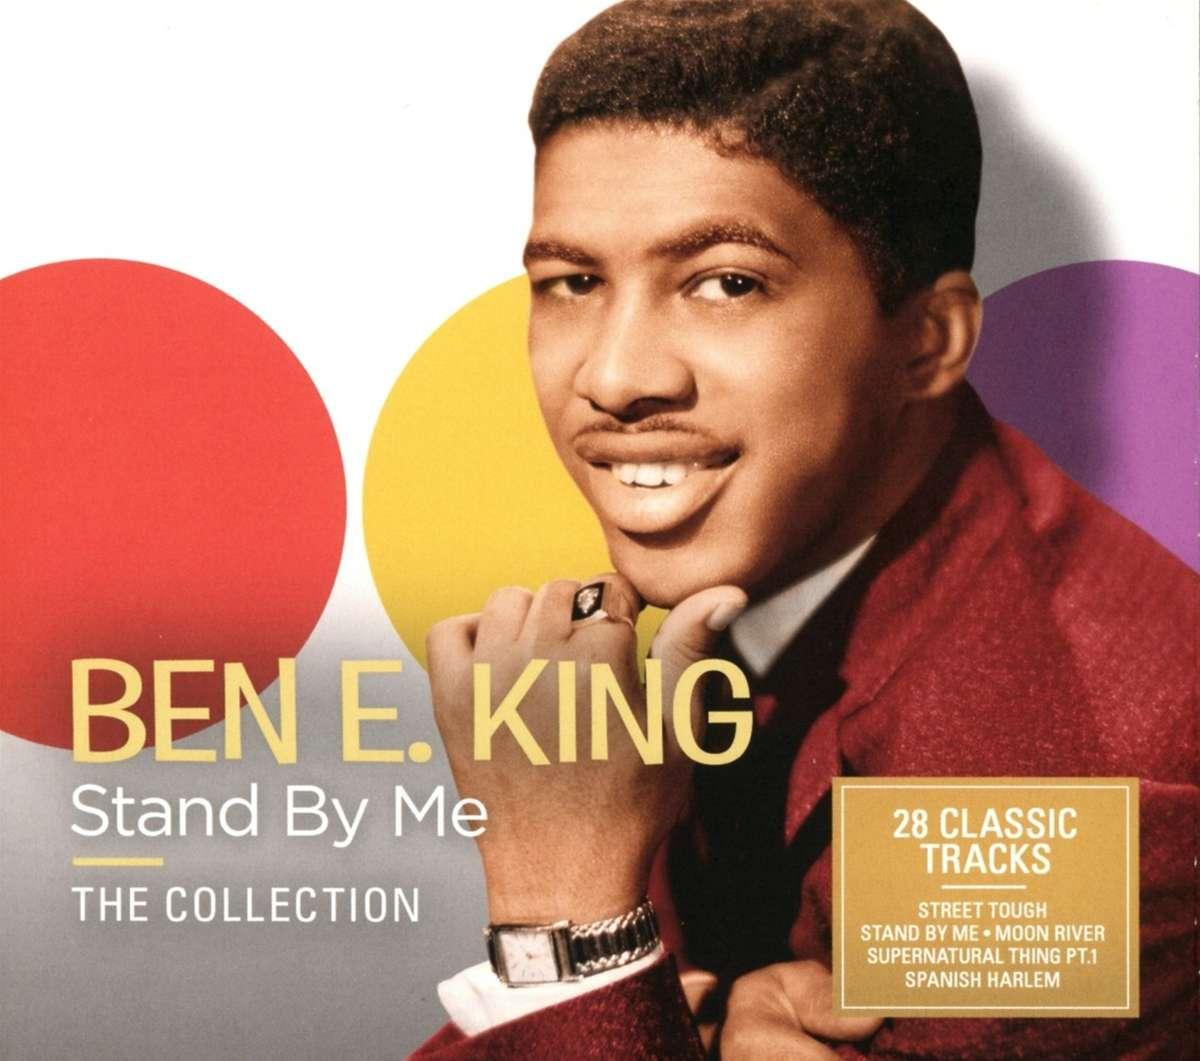 Ben E. King - Stand By Me (The Collection)